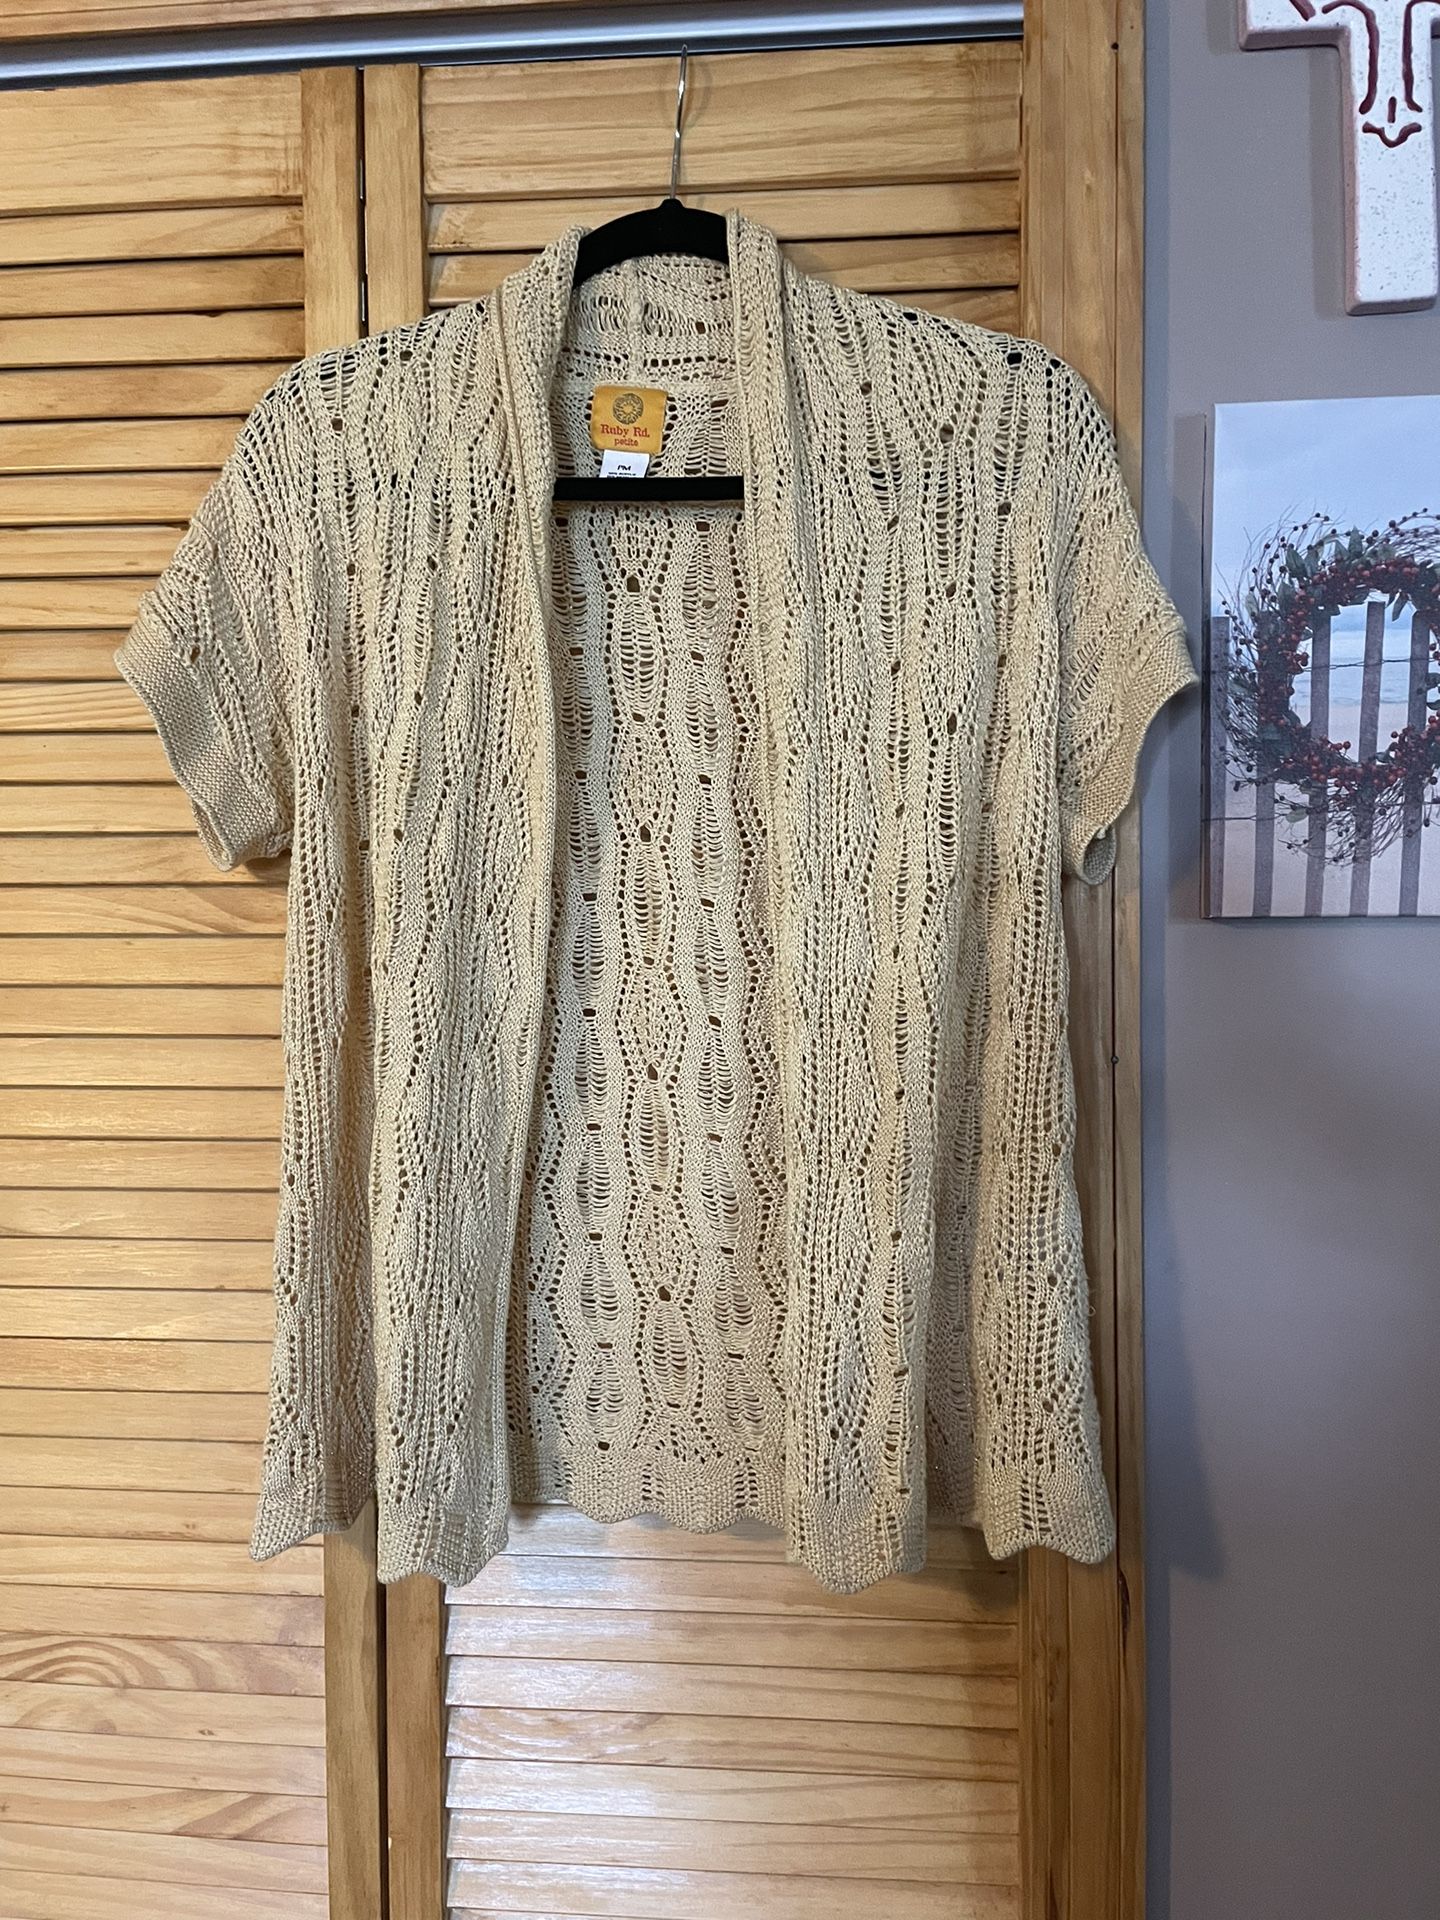 Women’s Short Sleeve Crochet, Look Sweater Size Medium, Petite, Strong Color, With A Hint Of Soft Yellow. 